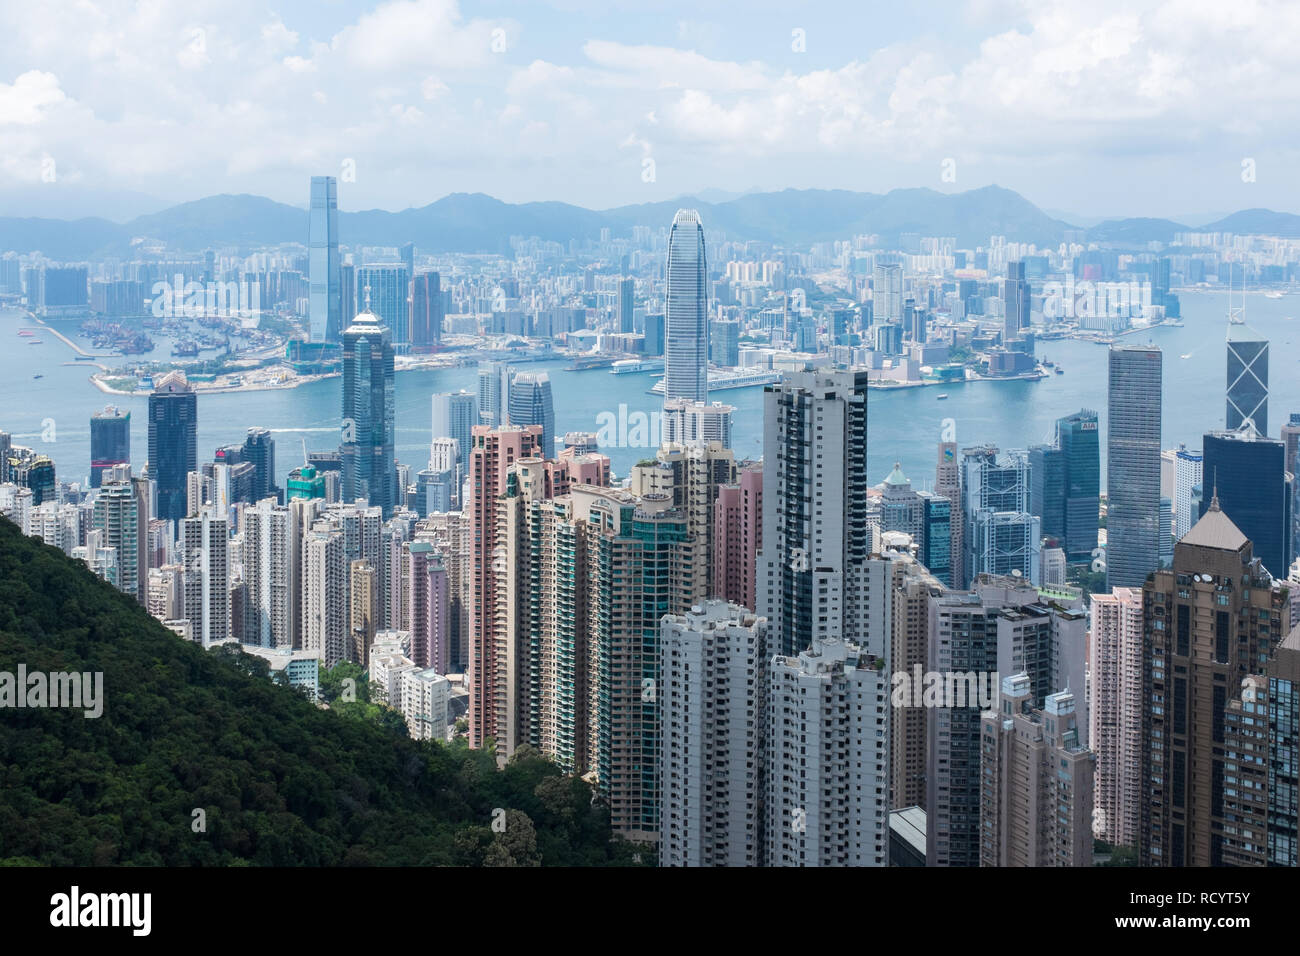 Looking down on high rise apartment blocks and offices in Hong Kong Stock Photo